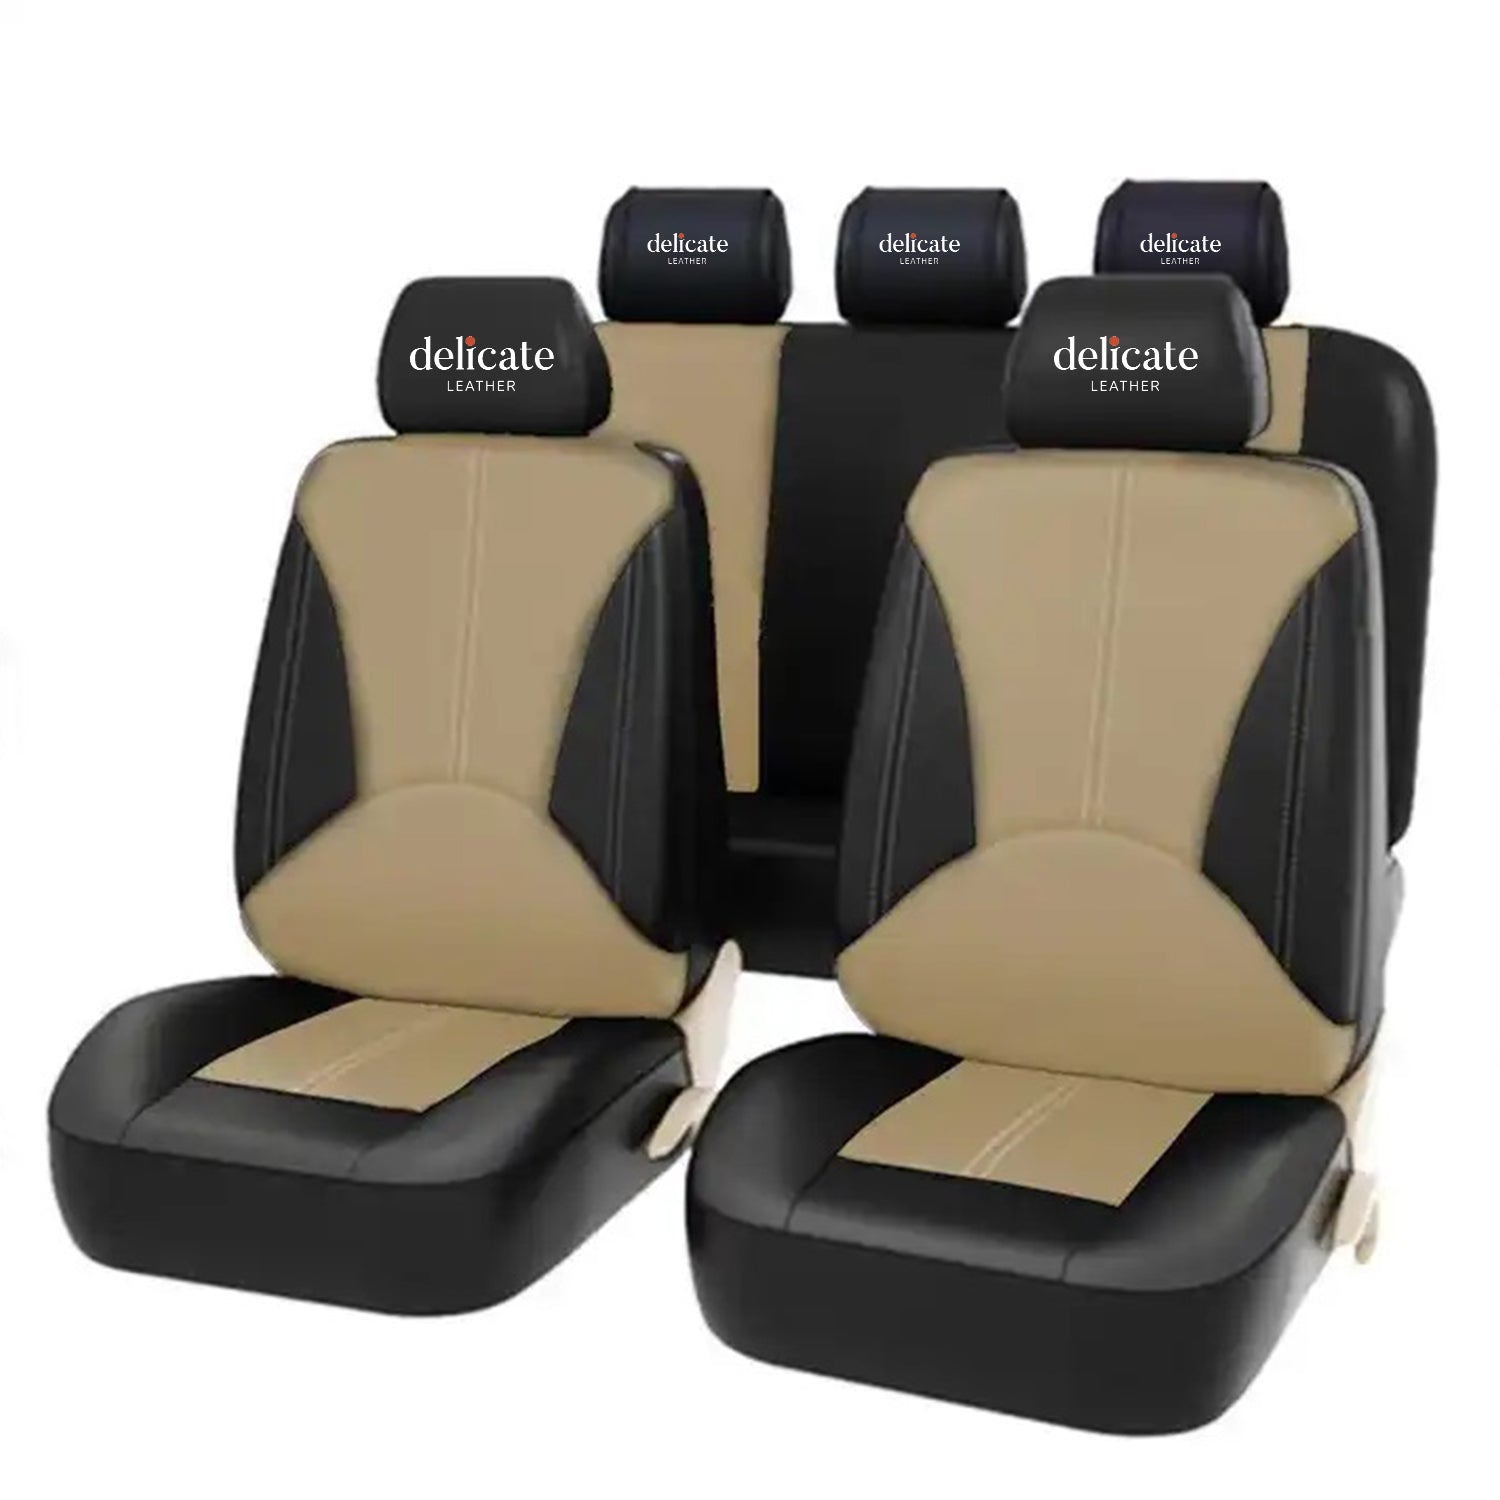 Delicate Leather Car Seat Cover Luxury Leather Car Seat Cover Custom Universal 5pcs Car Seat Cover Set Leather Full Set Universal